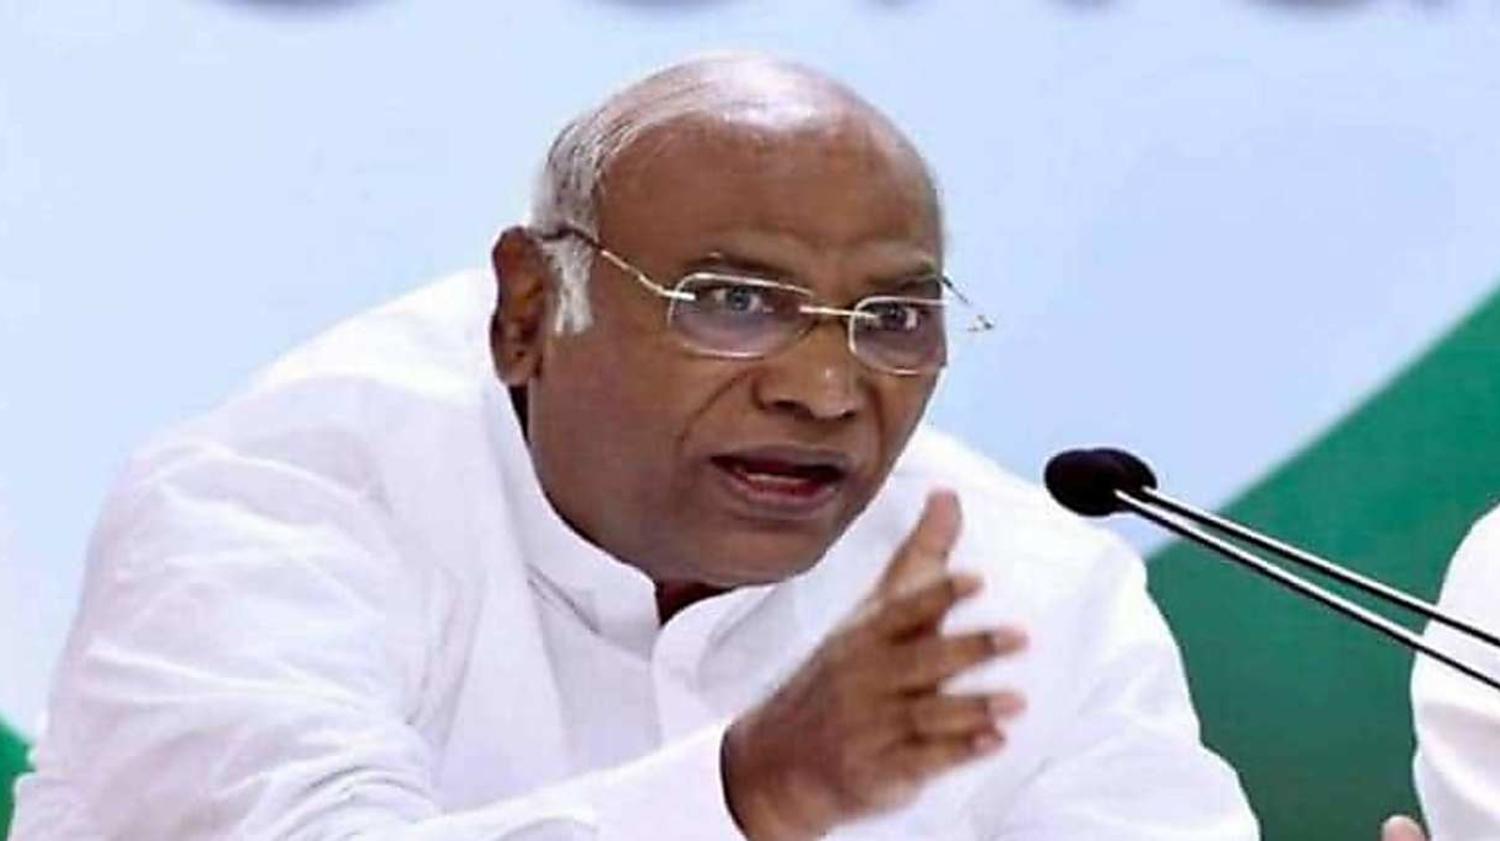 Mallikarjun Kharge Was Under Pressure From One Family To Not Let House Function Smoothly: Pralhad Joshi